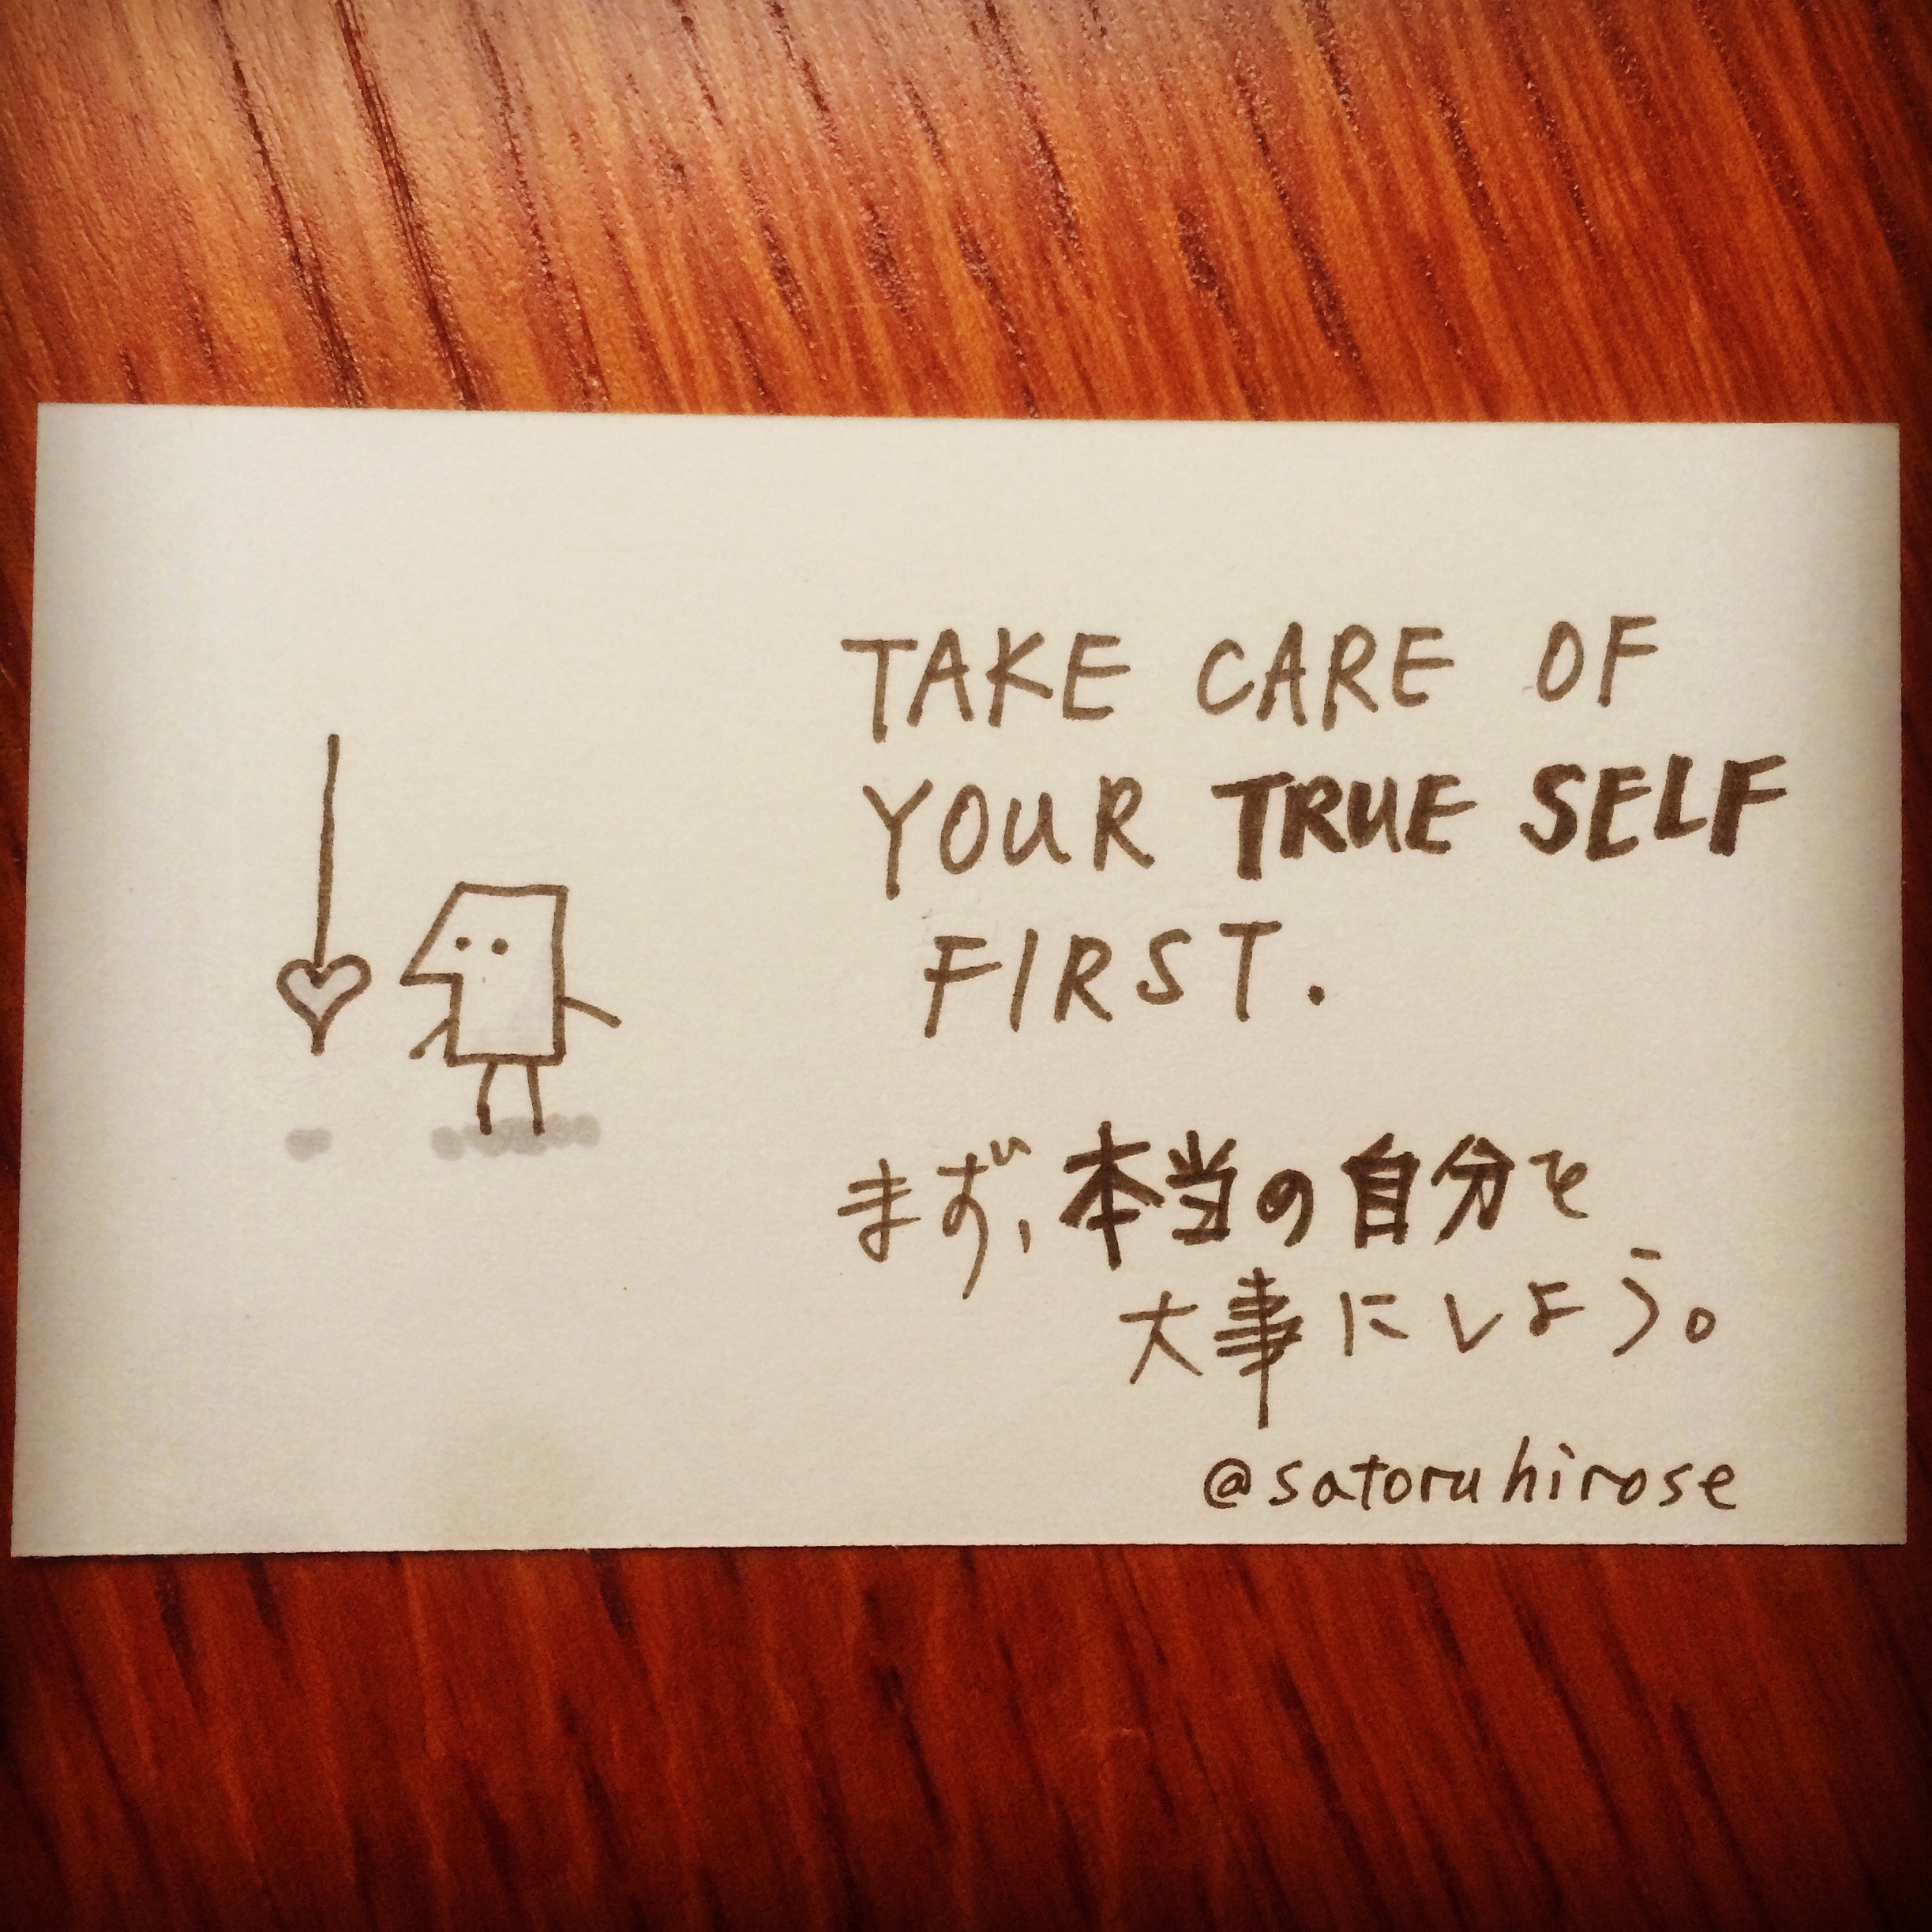 Take care of your true self first.